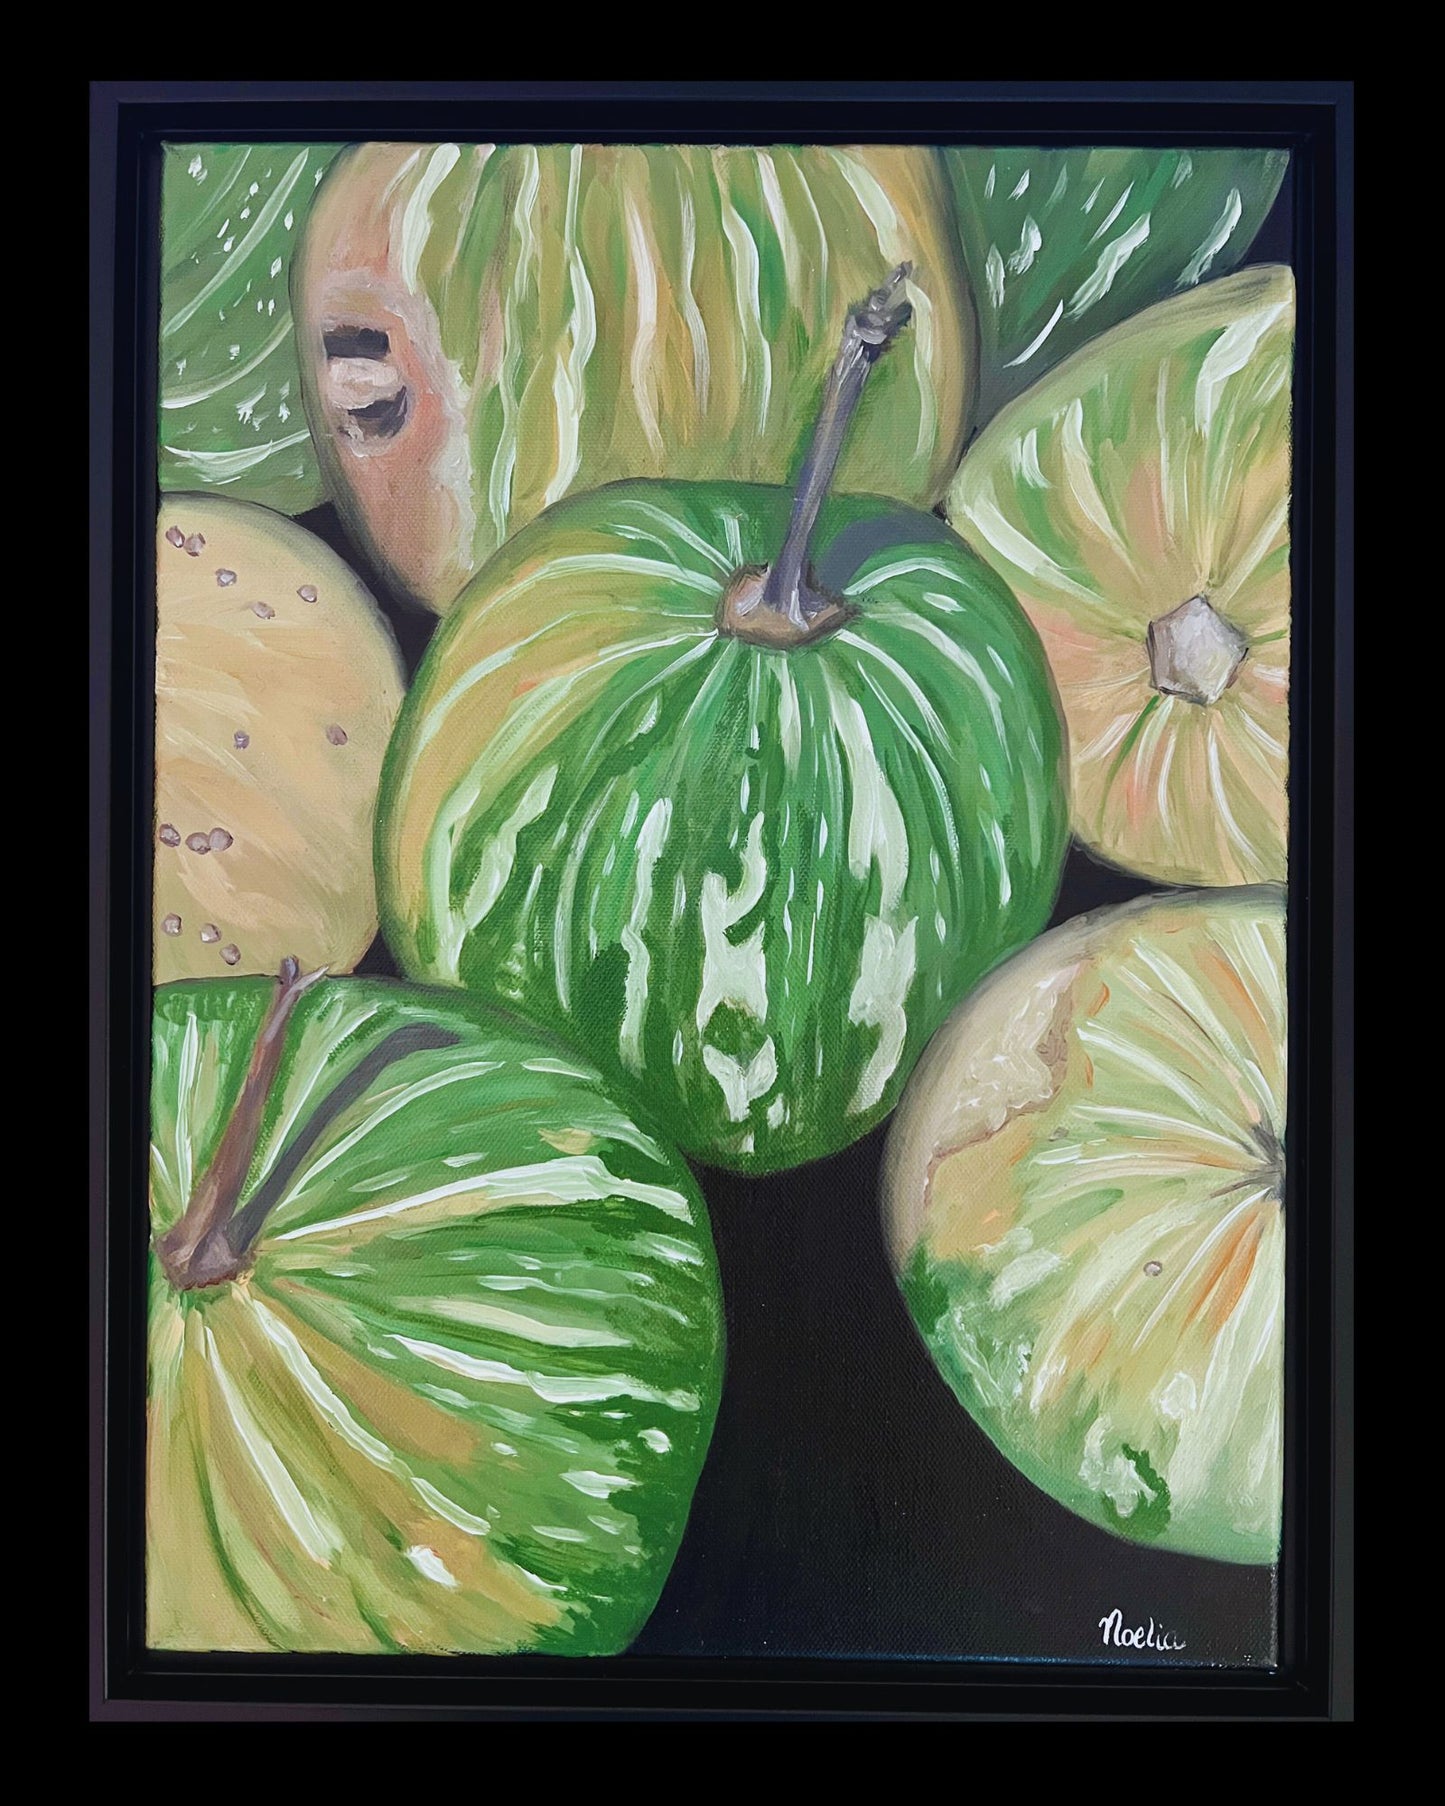 Green pumpkins with stripes calabaza variety oil painting in black frame by noeklia montaner